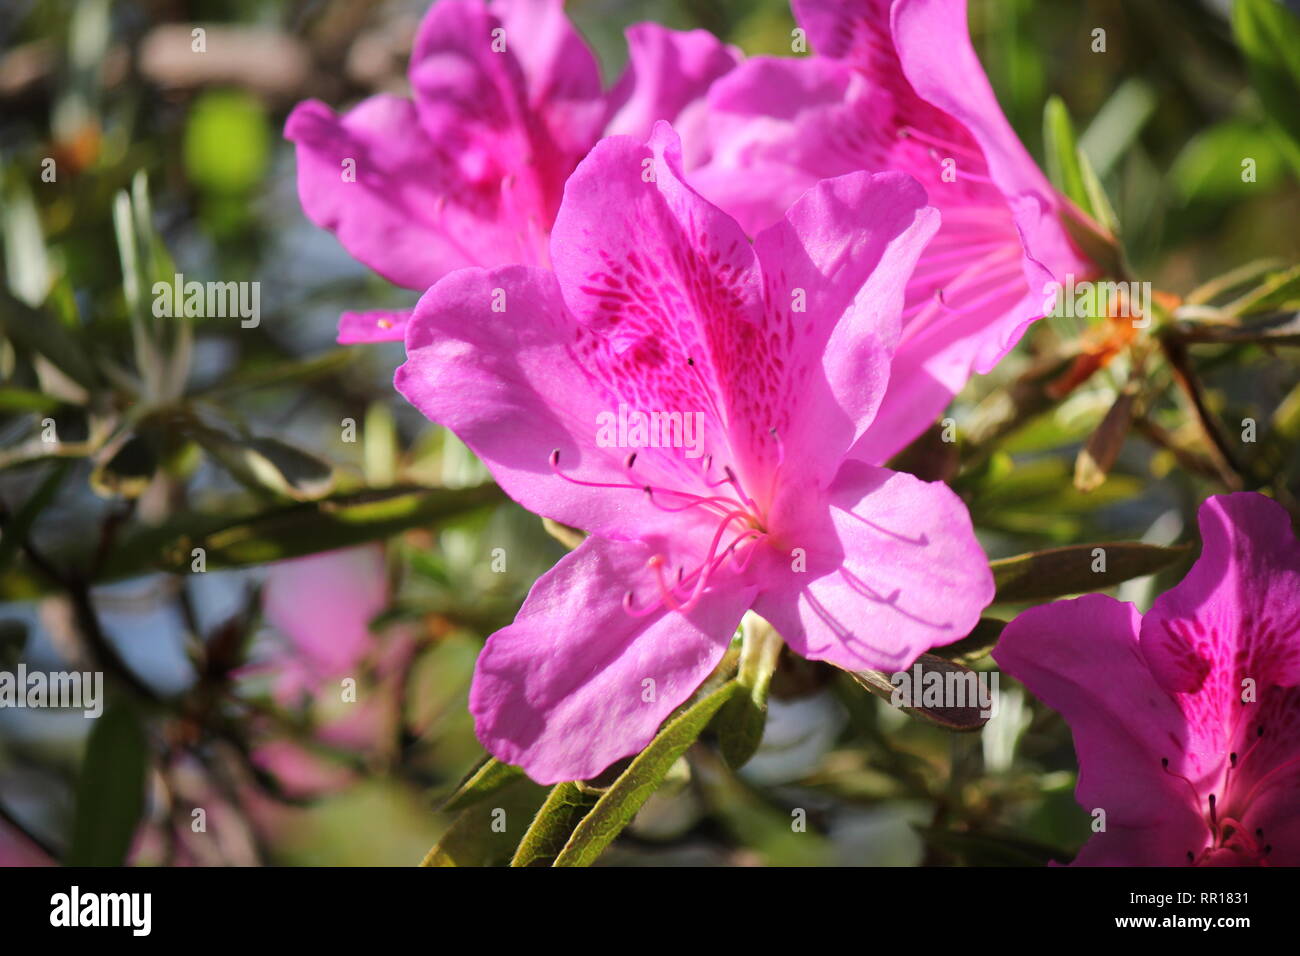 Beautiful cultivated flowering orchid pink azalea phoenicia rhododendron  plant growing in the flower garden. Stock Photo